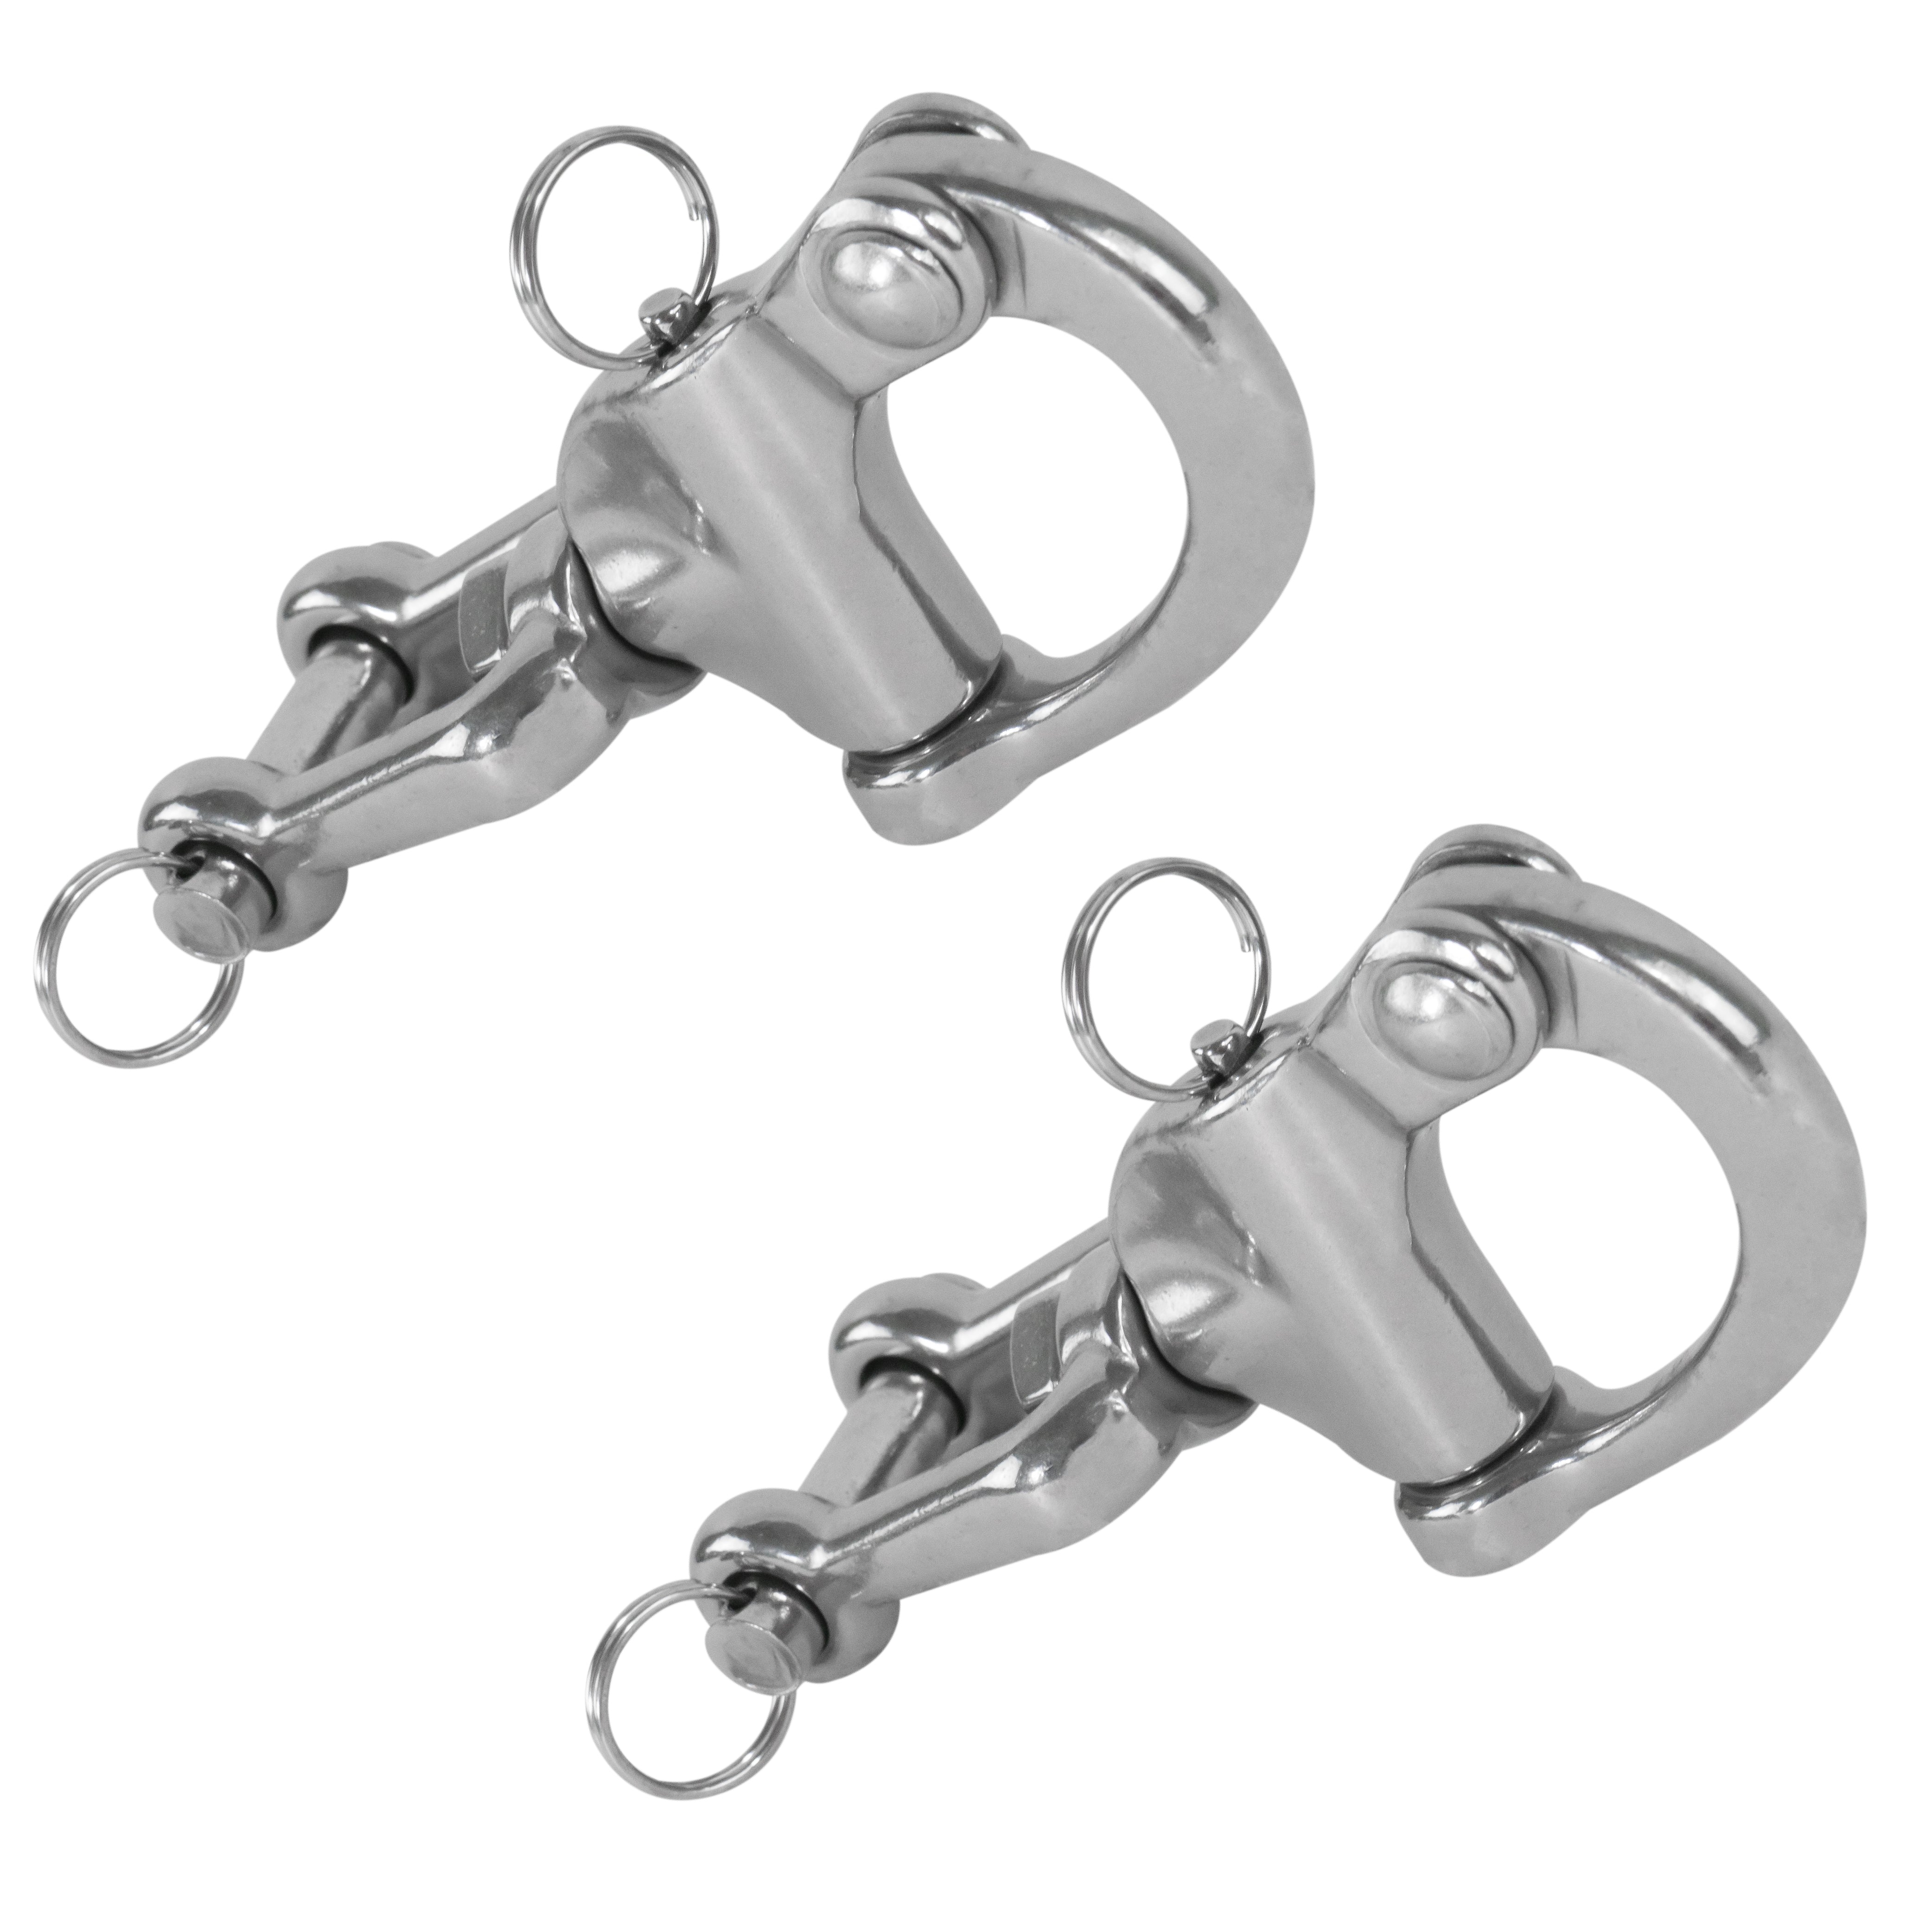 Jaw Swivel Eye Snap Shackle, 5" Stainless Steel 2-Pack - FO448-M2